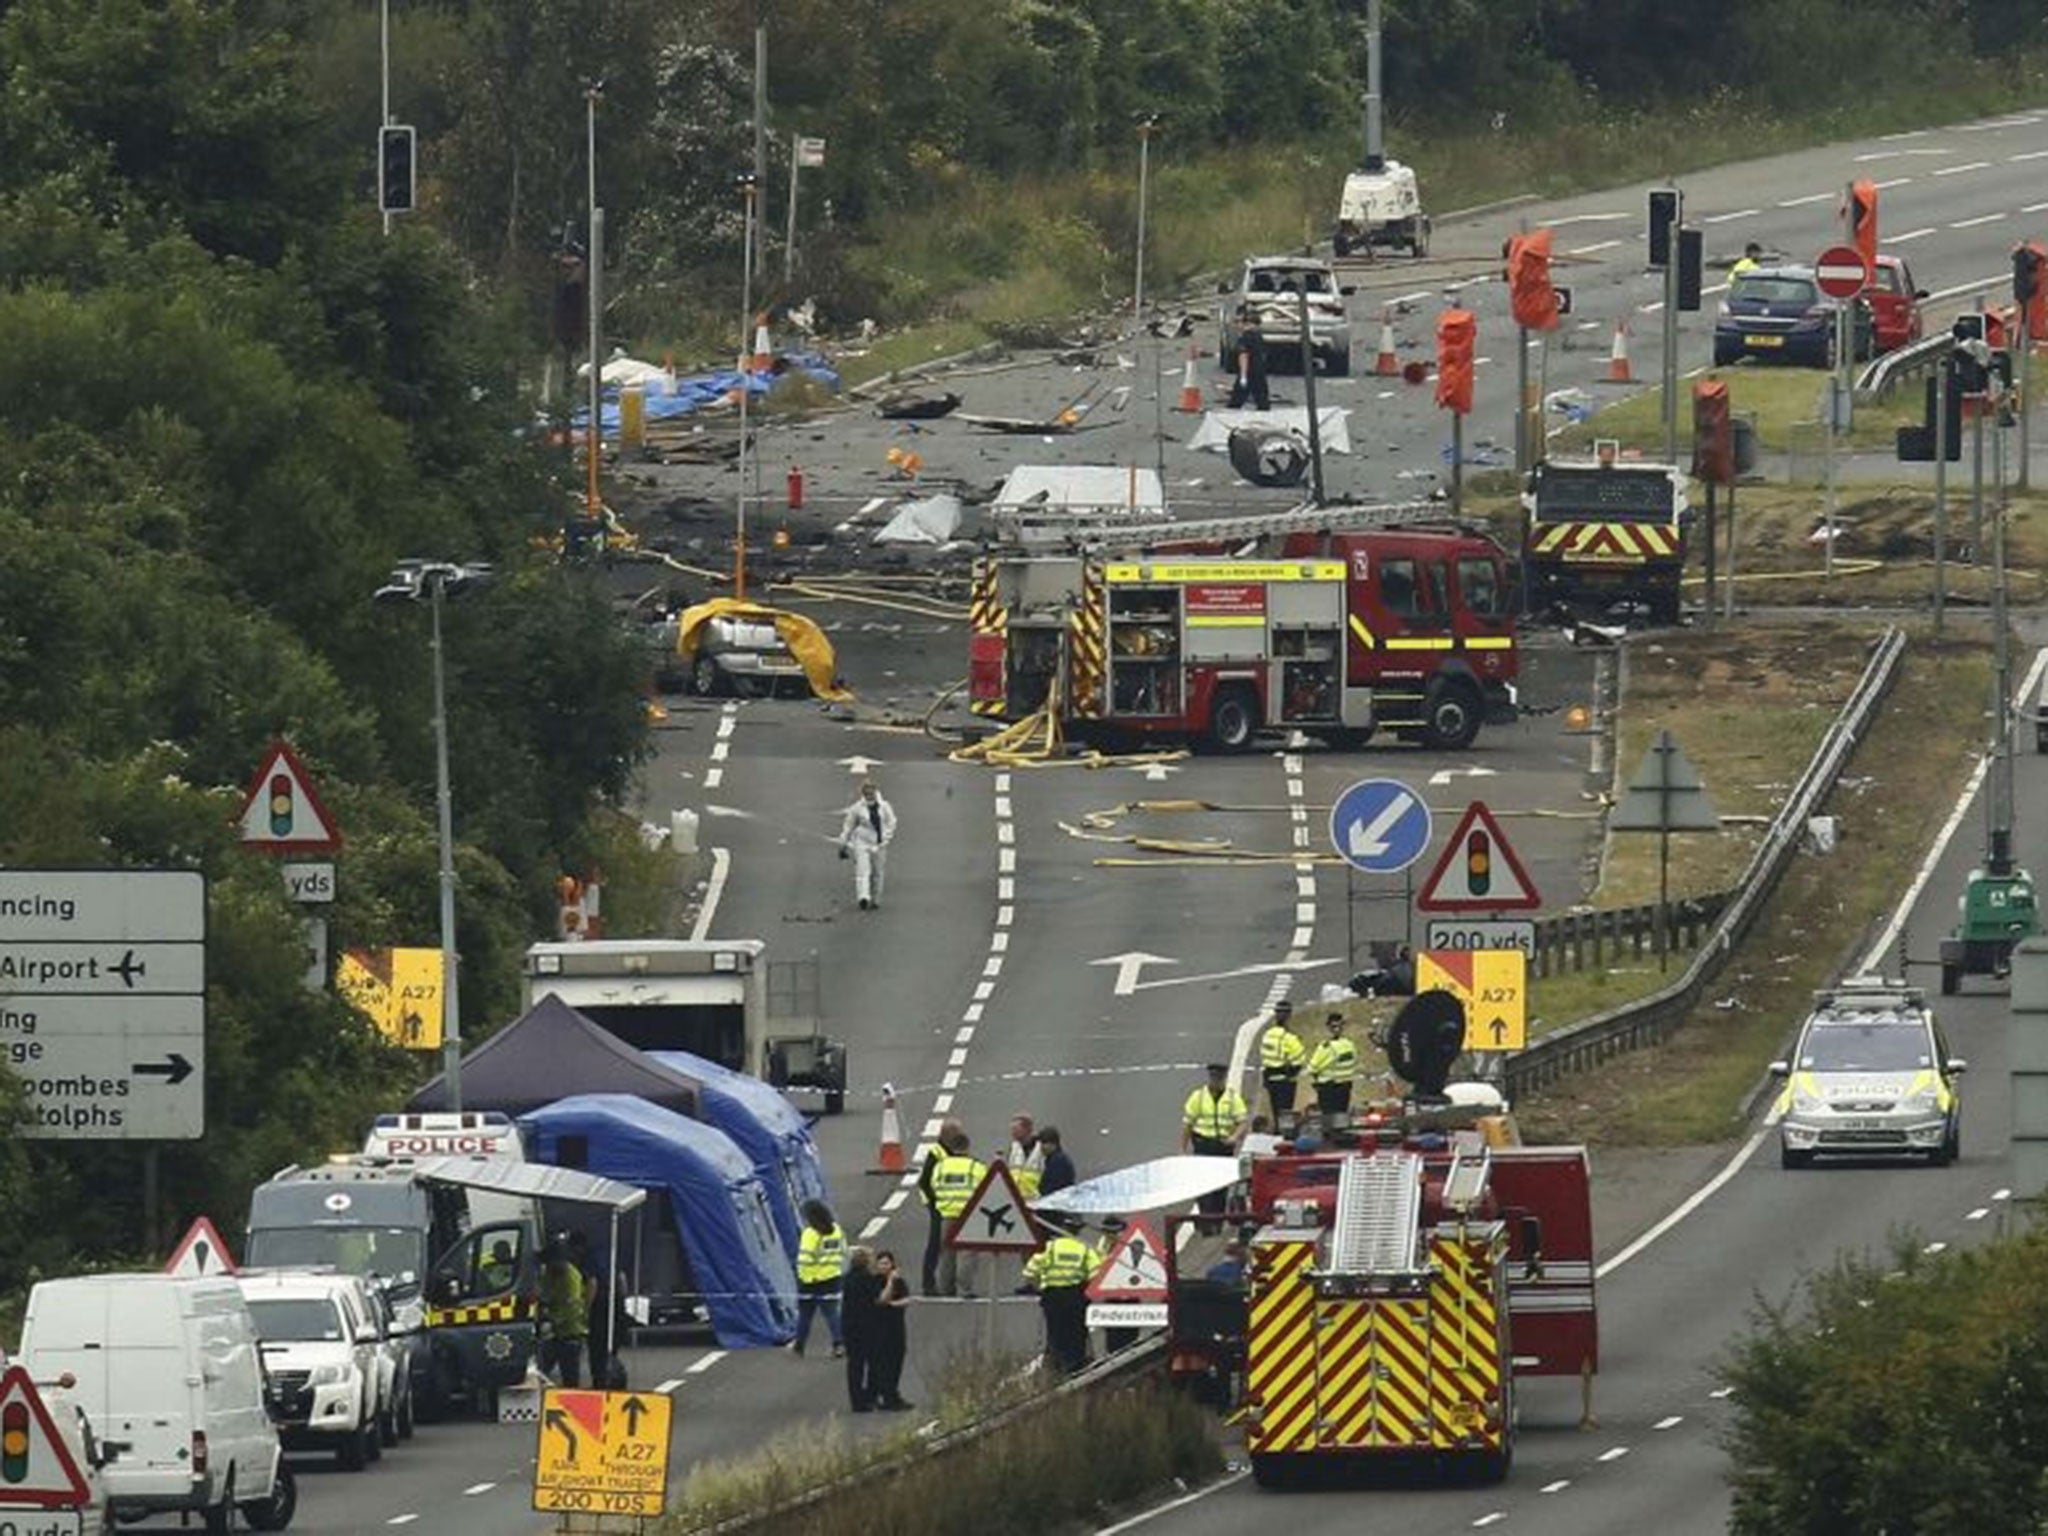 Emergency services and crash investigation officers work at the site where a Hawker Hunter fighter jet crashed onto the A27